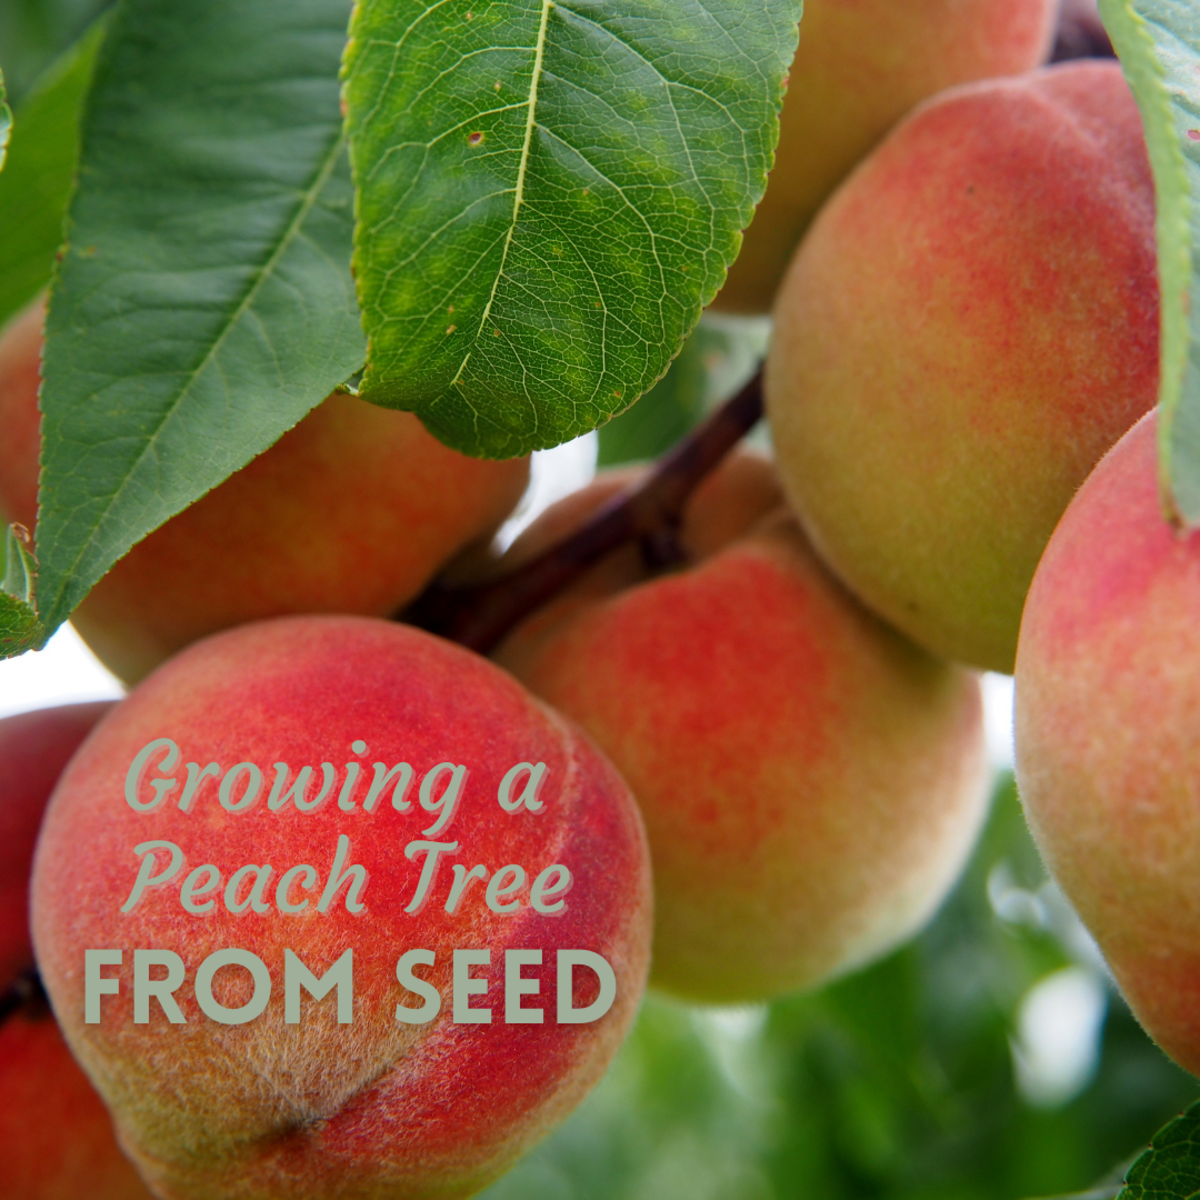 You can grow a peach tree from seed. Here's how!